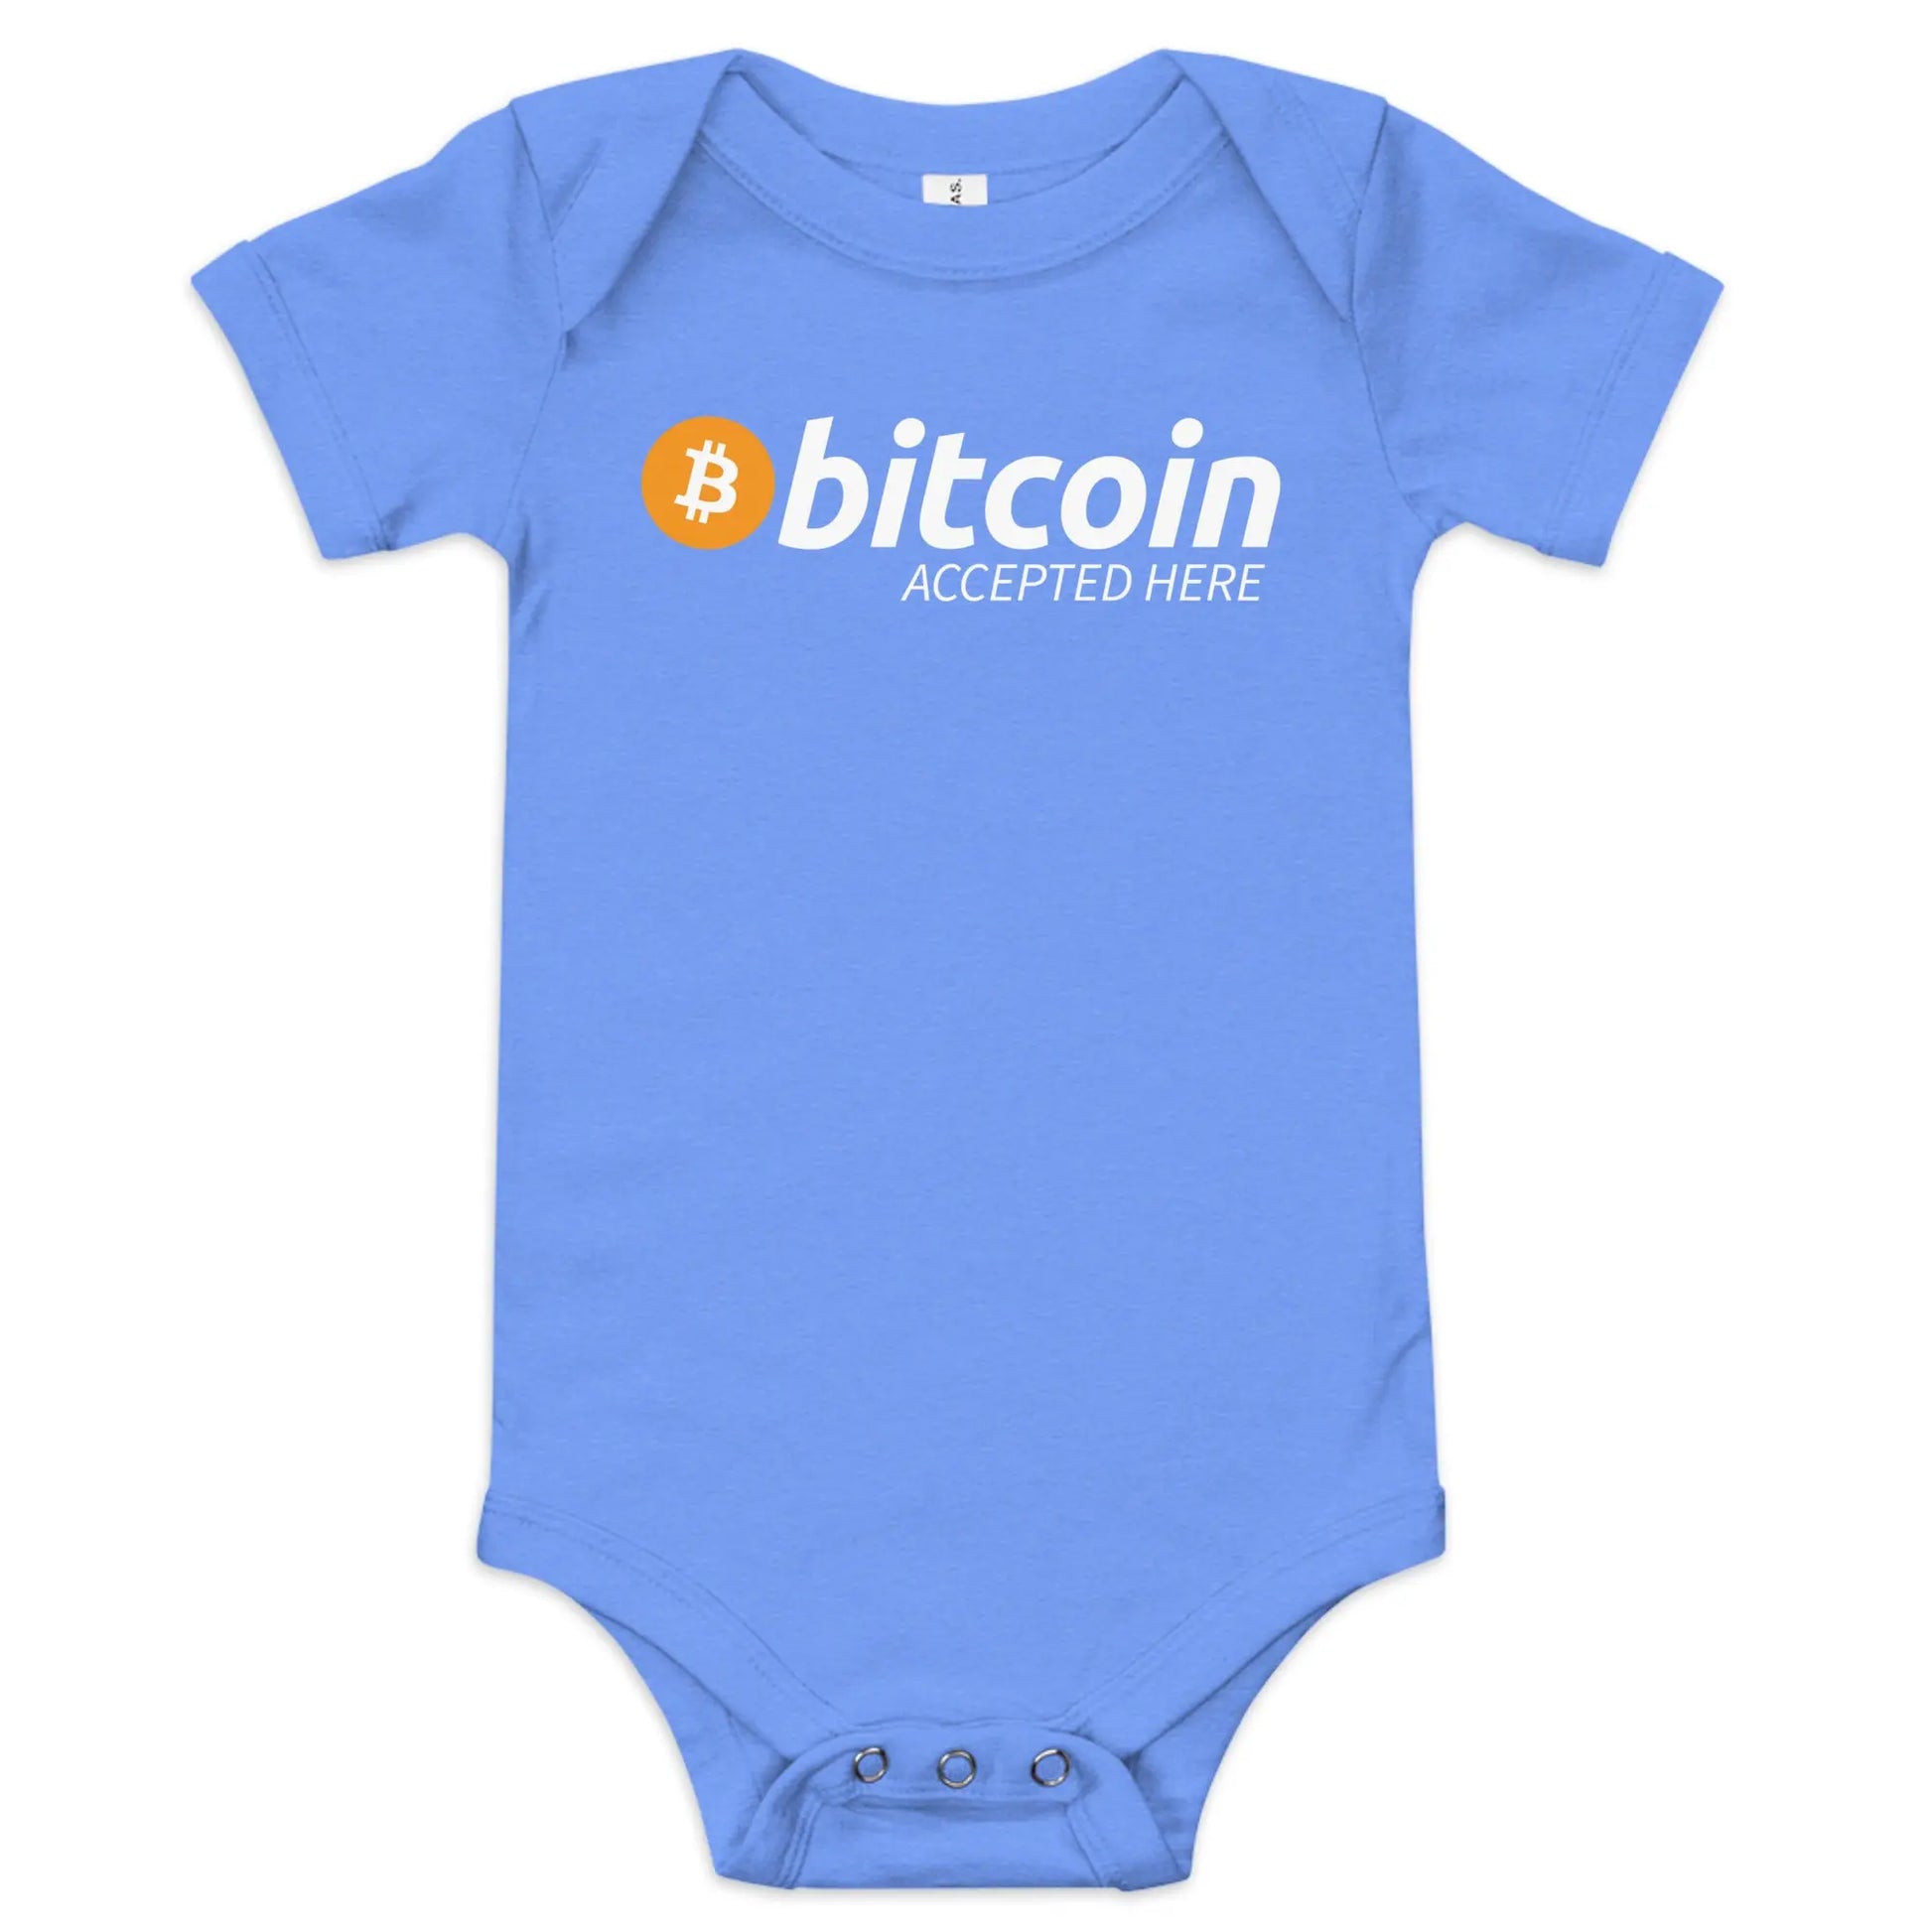 Bitcoin Accepted Here - Baby Bitcoin Body Suit - One Piece with Short Sleeve Bue